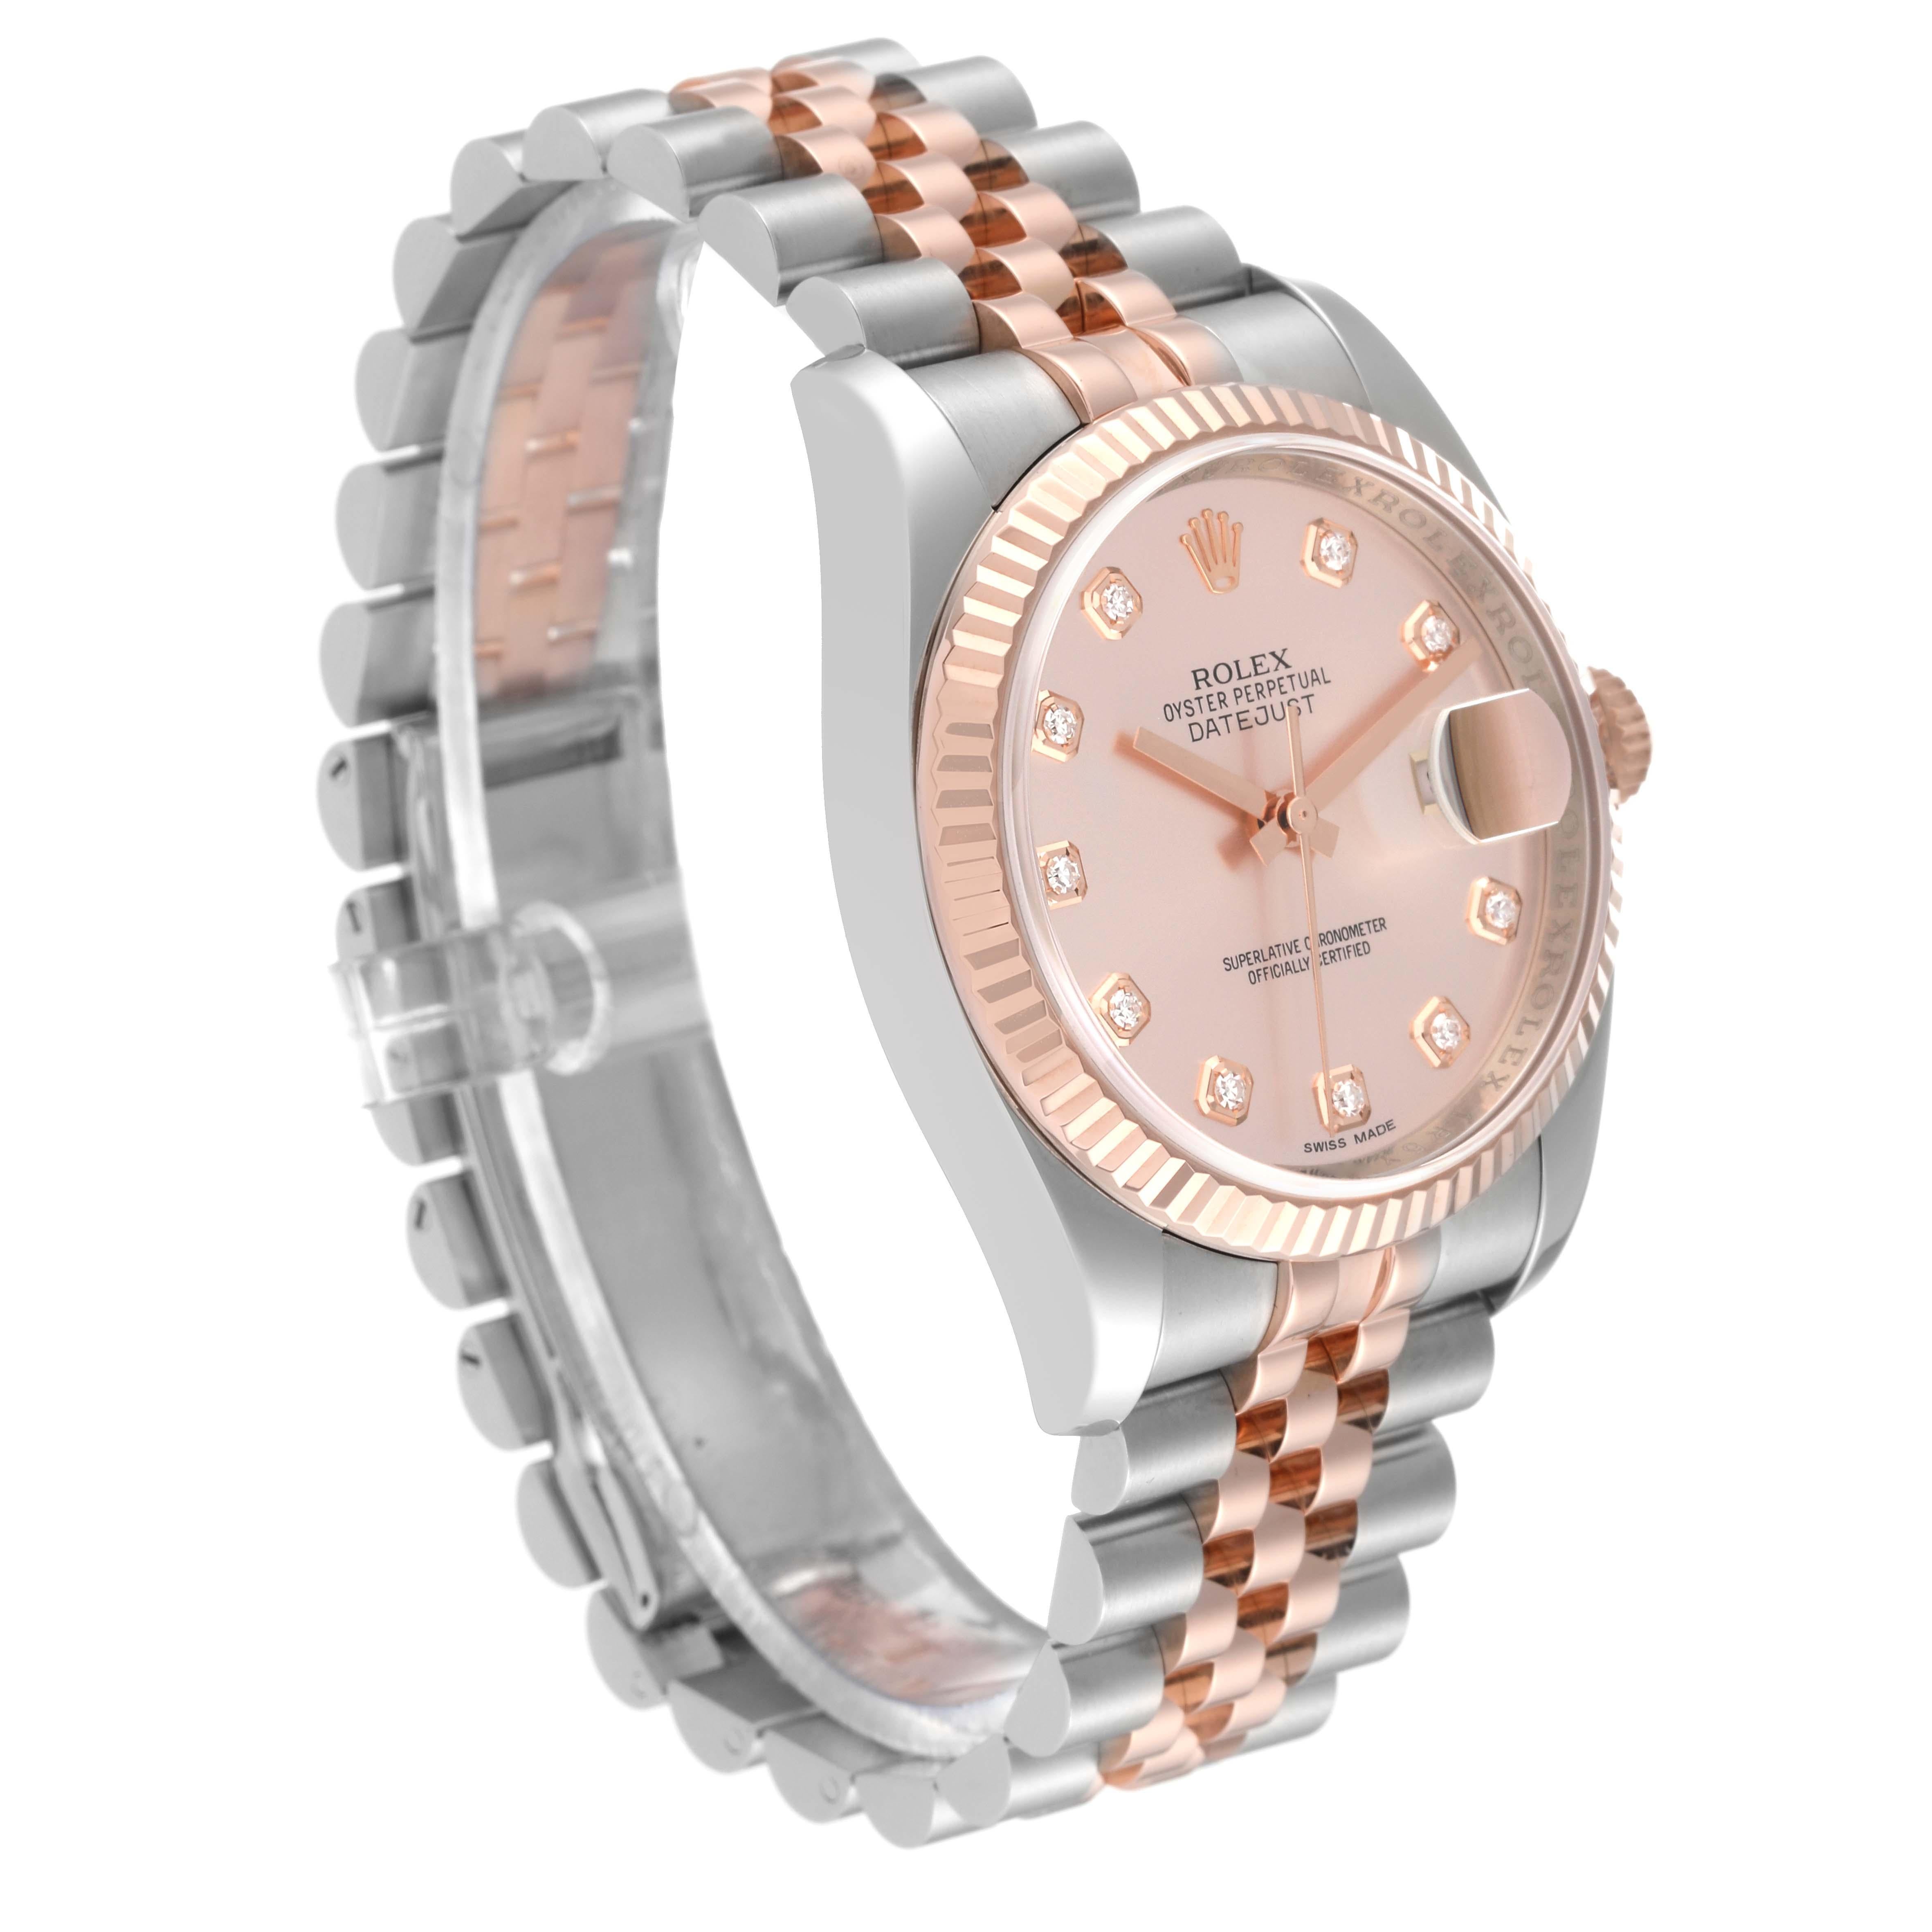 Rolex Datejust Steel Rose Gold Pink Diamond Dial Mens Watch 116231 In Excellent Condition For Sale In Atlanta, GA